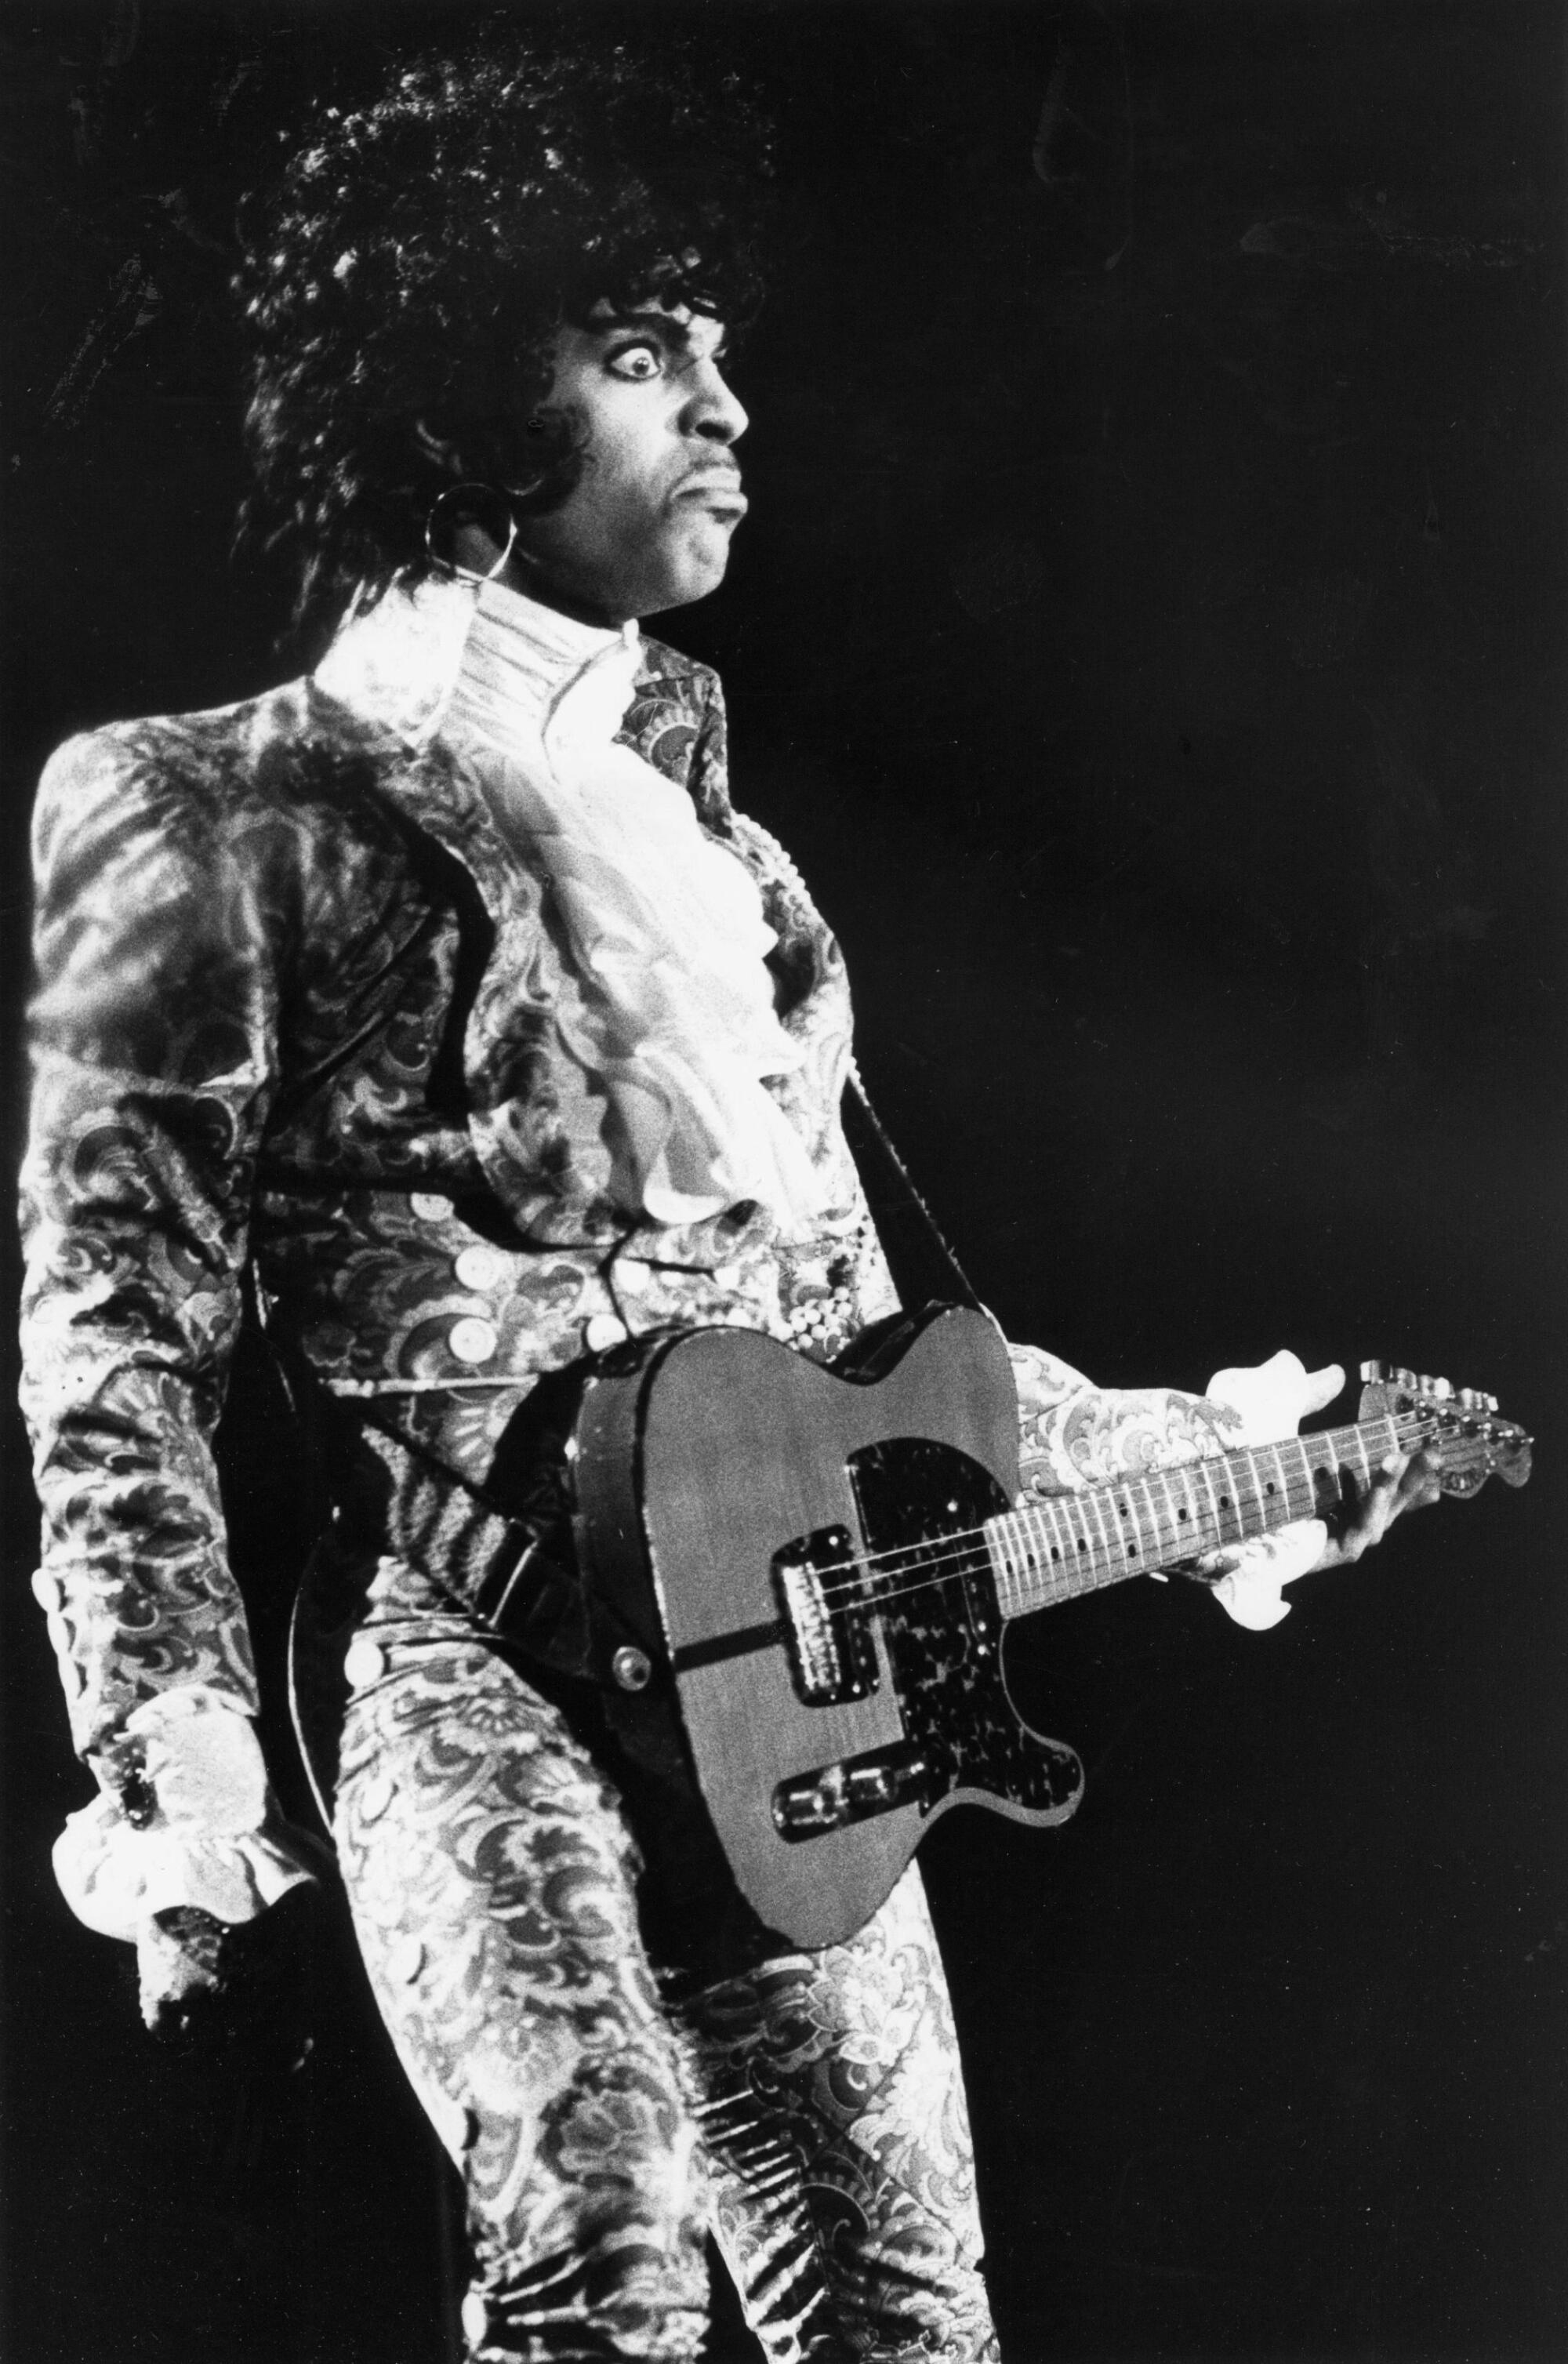 Prince, in ruffled shirt and velvet suit, holds a guitar onstage.